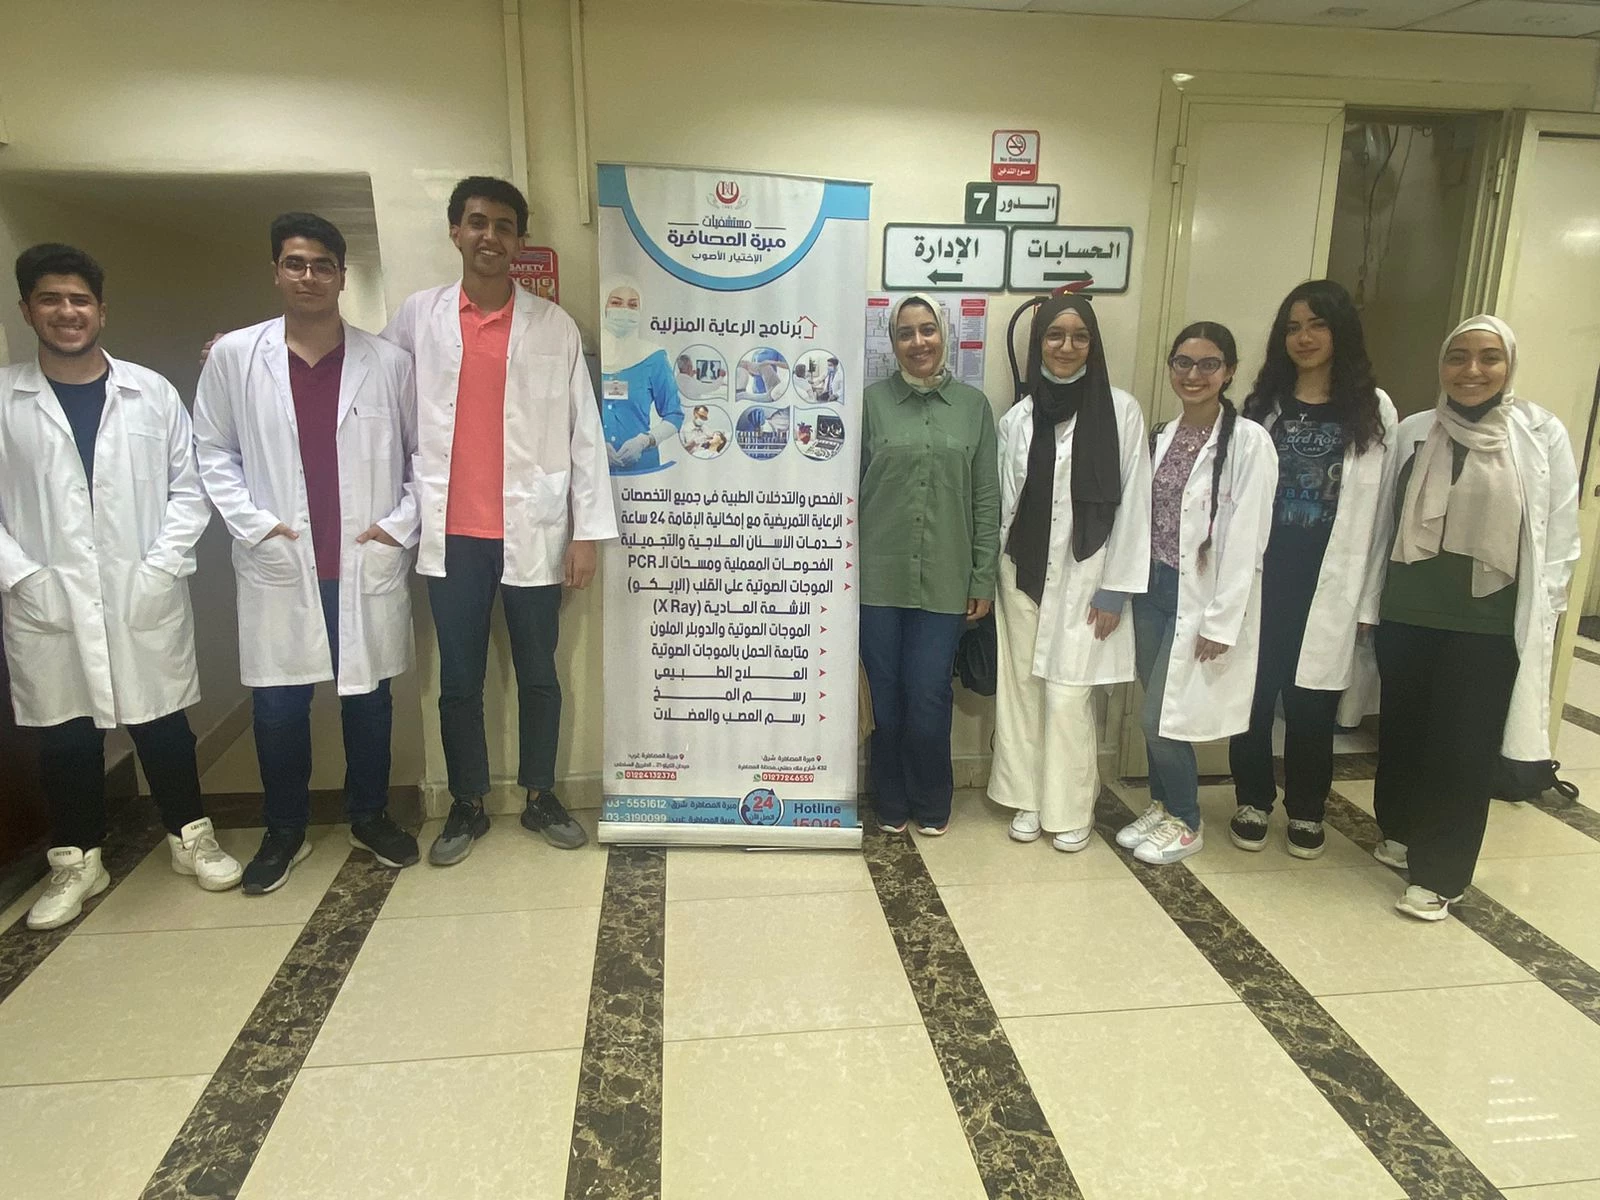 The beginning of the first week of the summer training program for first-year students in private sector hospitals5